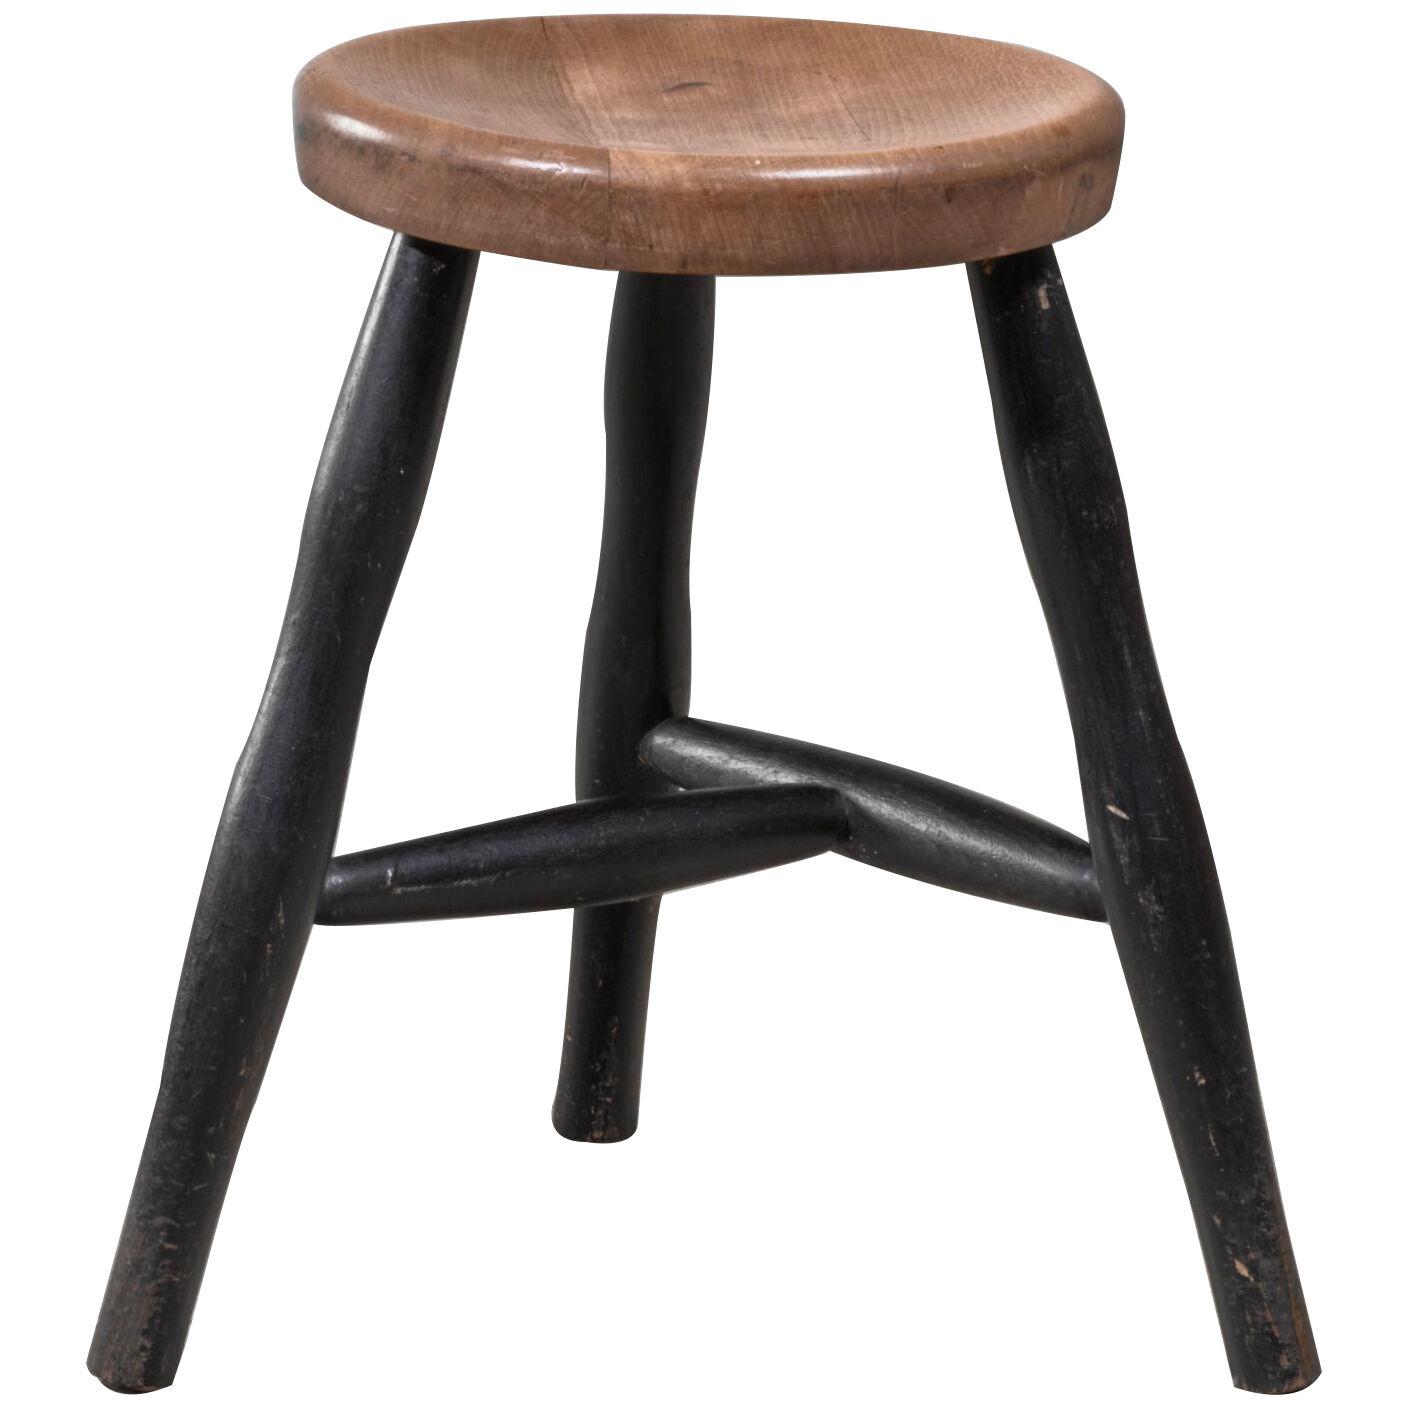 Tribase Stool with Thick Wooden Seat, 1950s